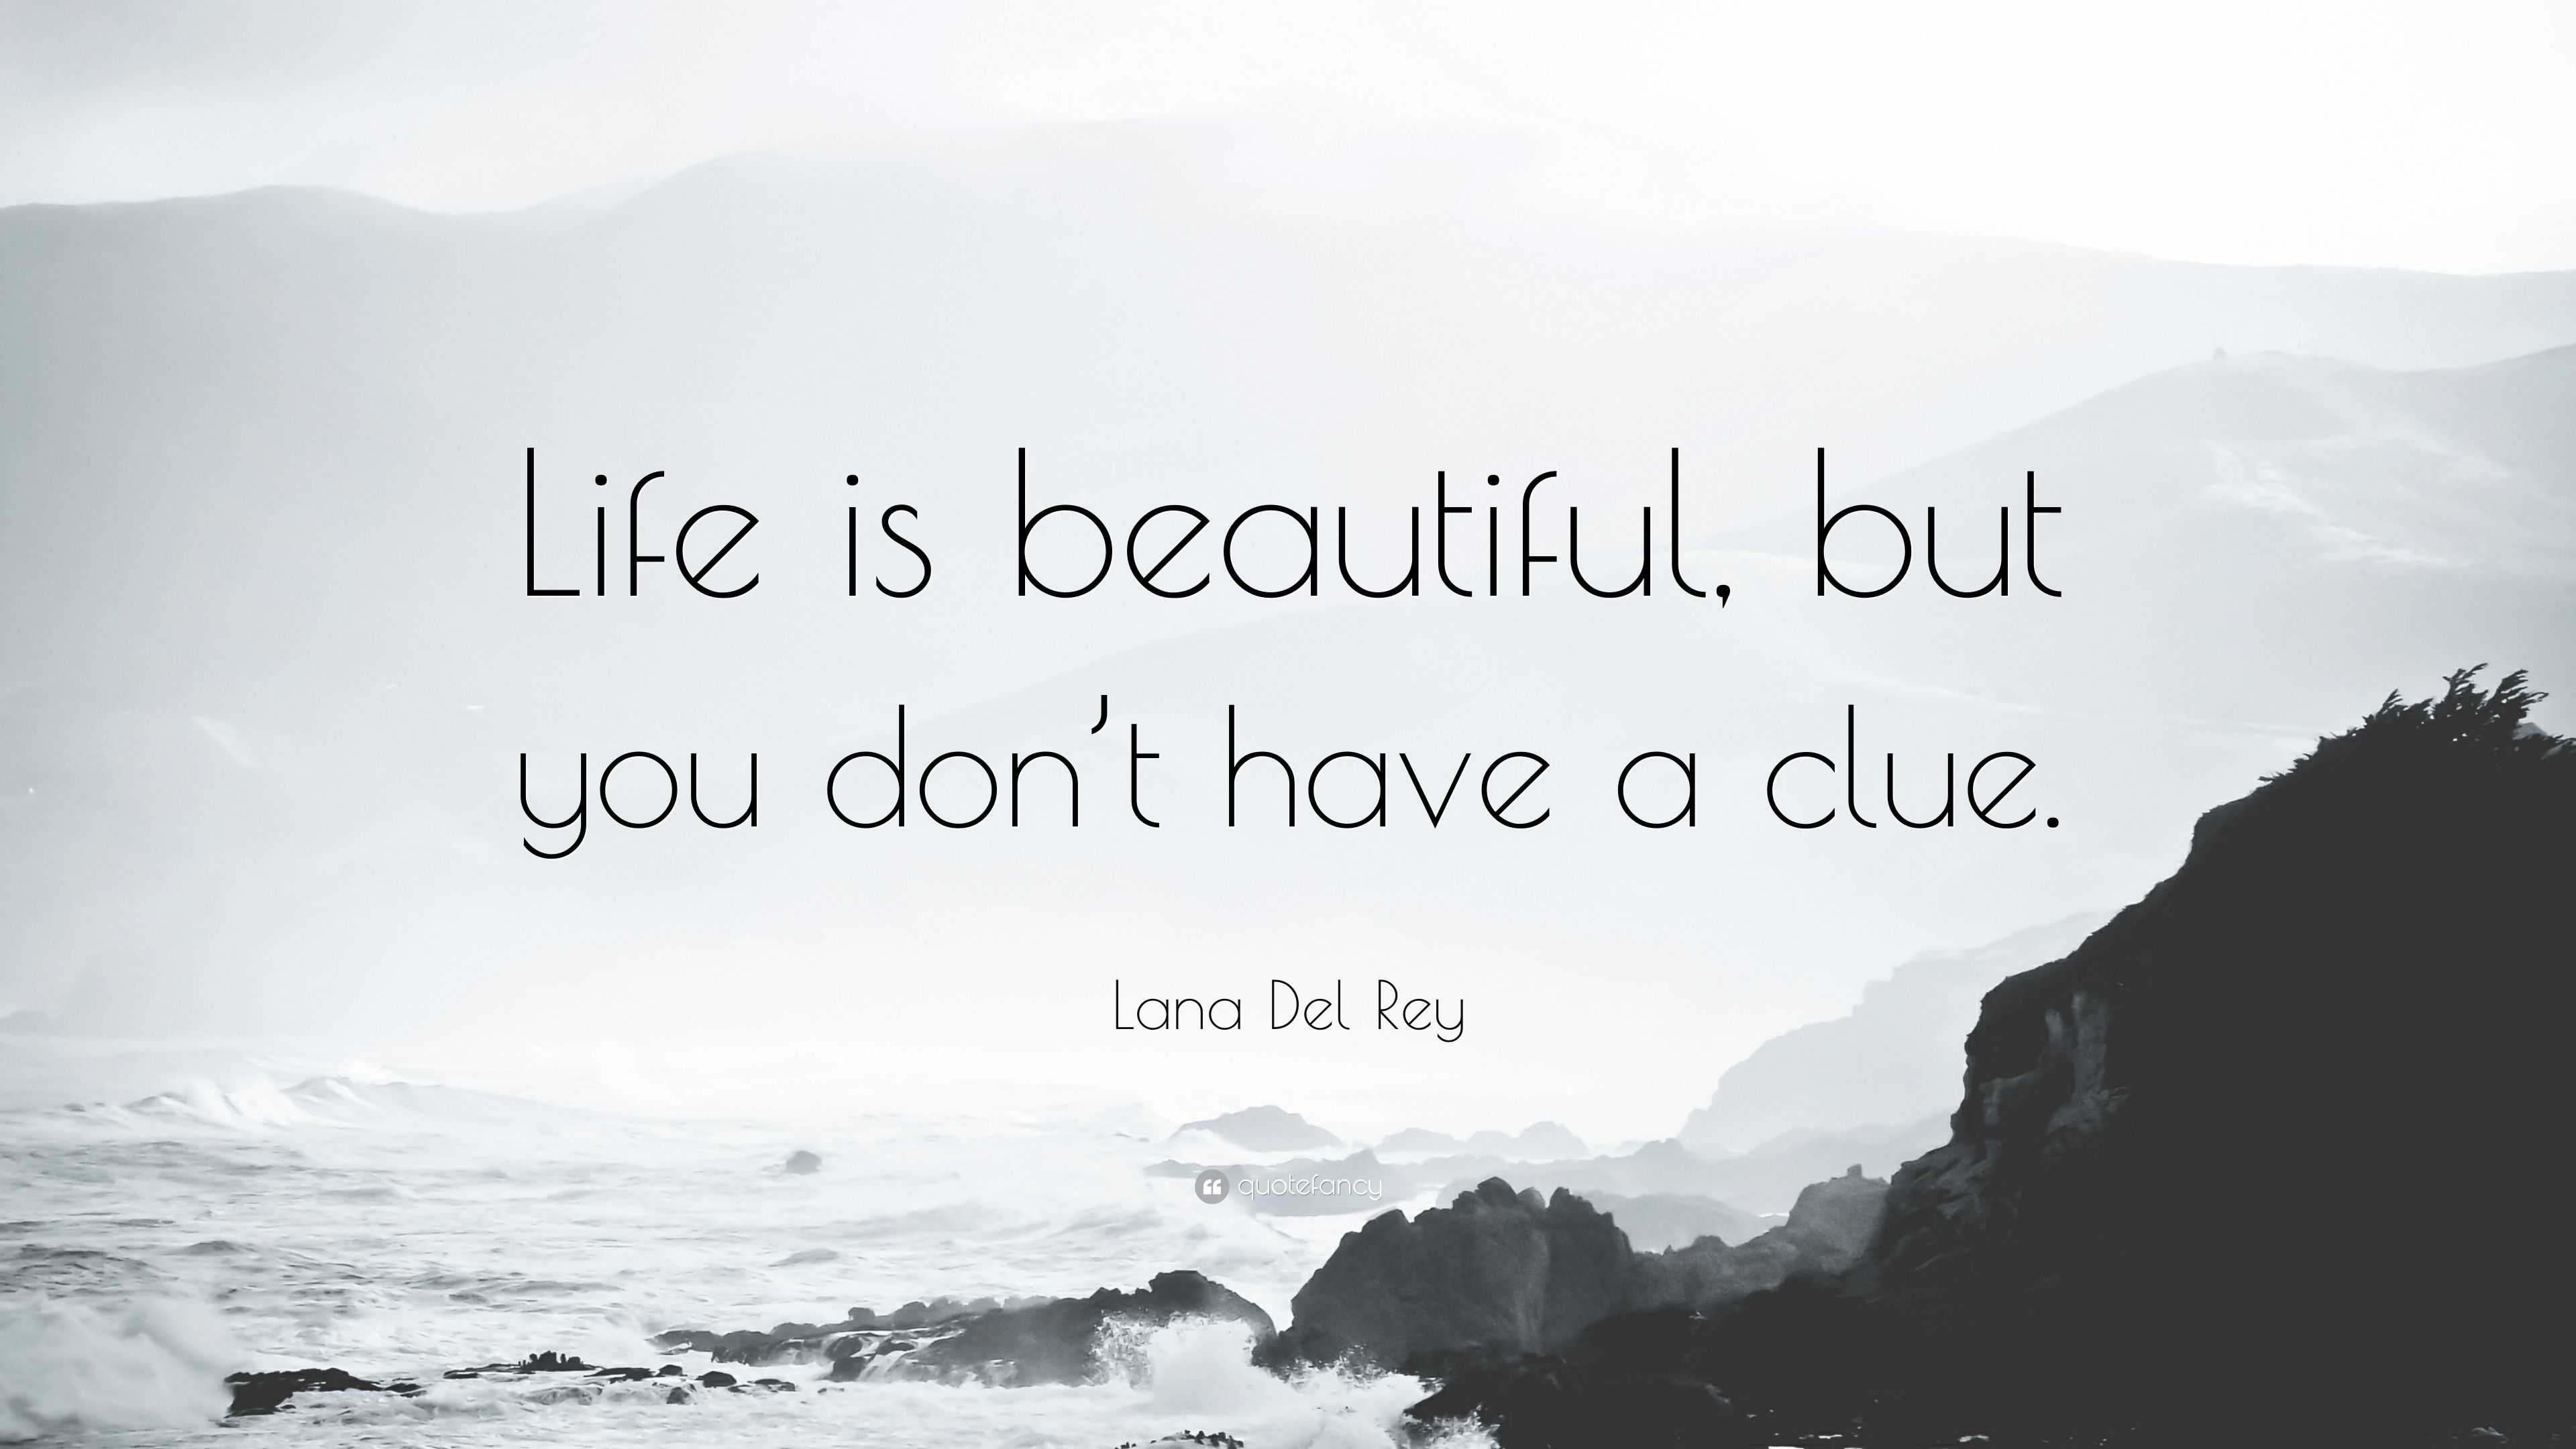 Lana Del Rey Quote “Life is beautiful but you don t have